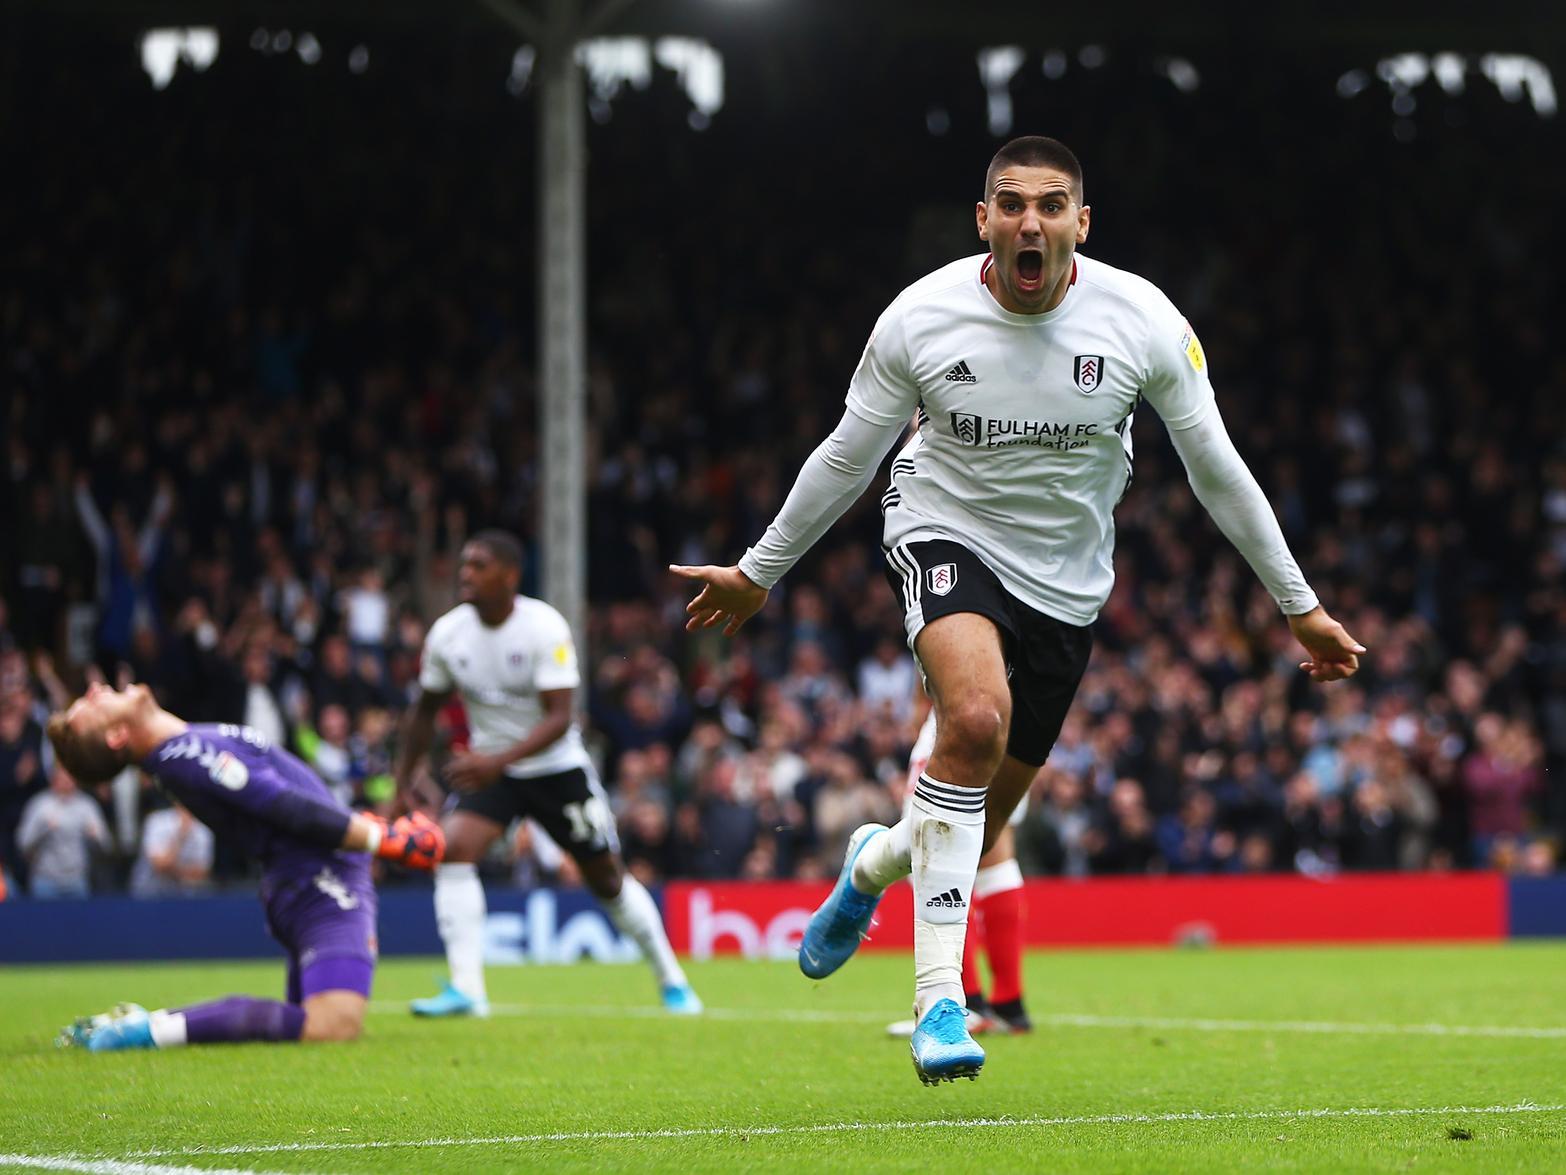 Fulham's 25-year-old Serbian international tops the Championship goalscoring charts with 12 and an average rating of 7.3 puts him in the team of the season so far. Photo by Jordan Mansfield/Getty Images.